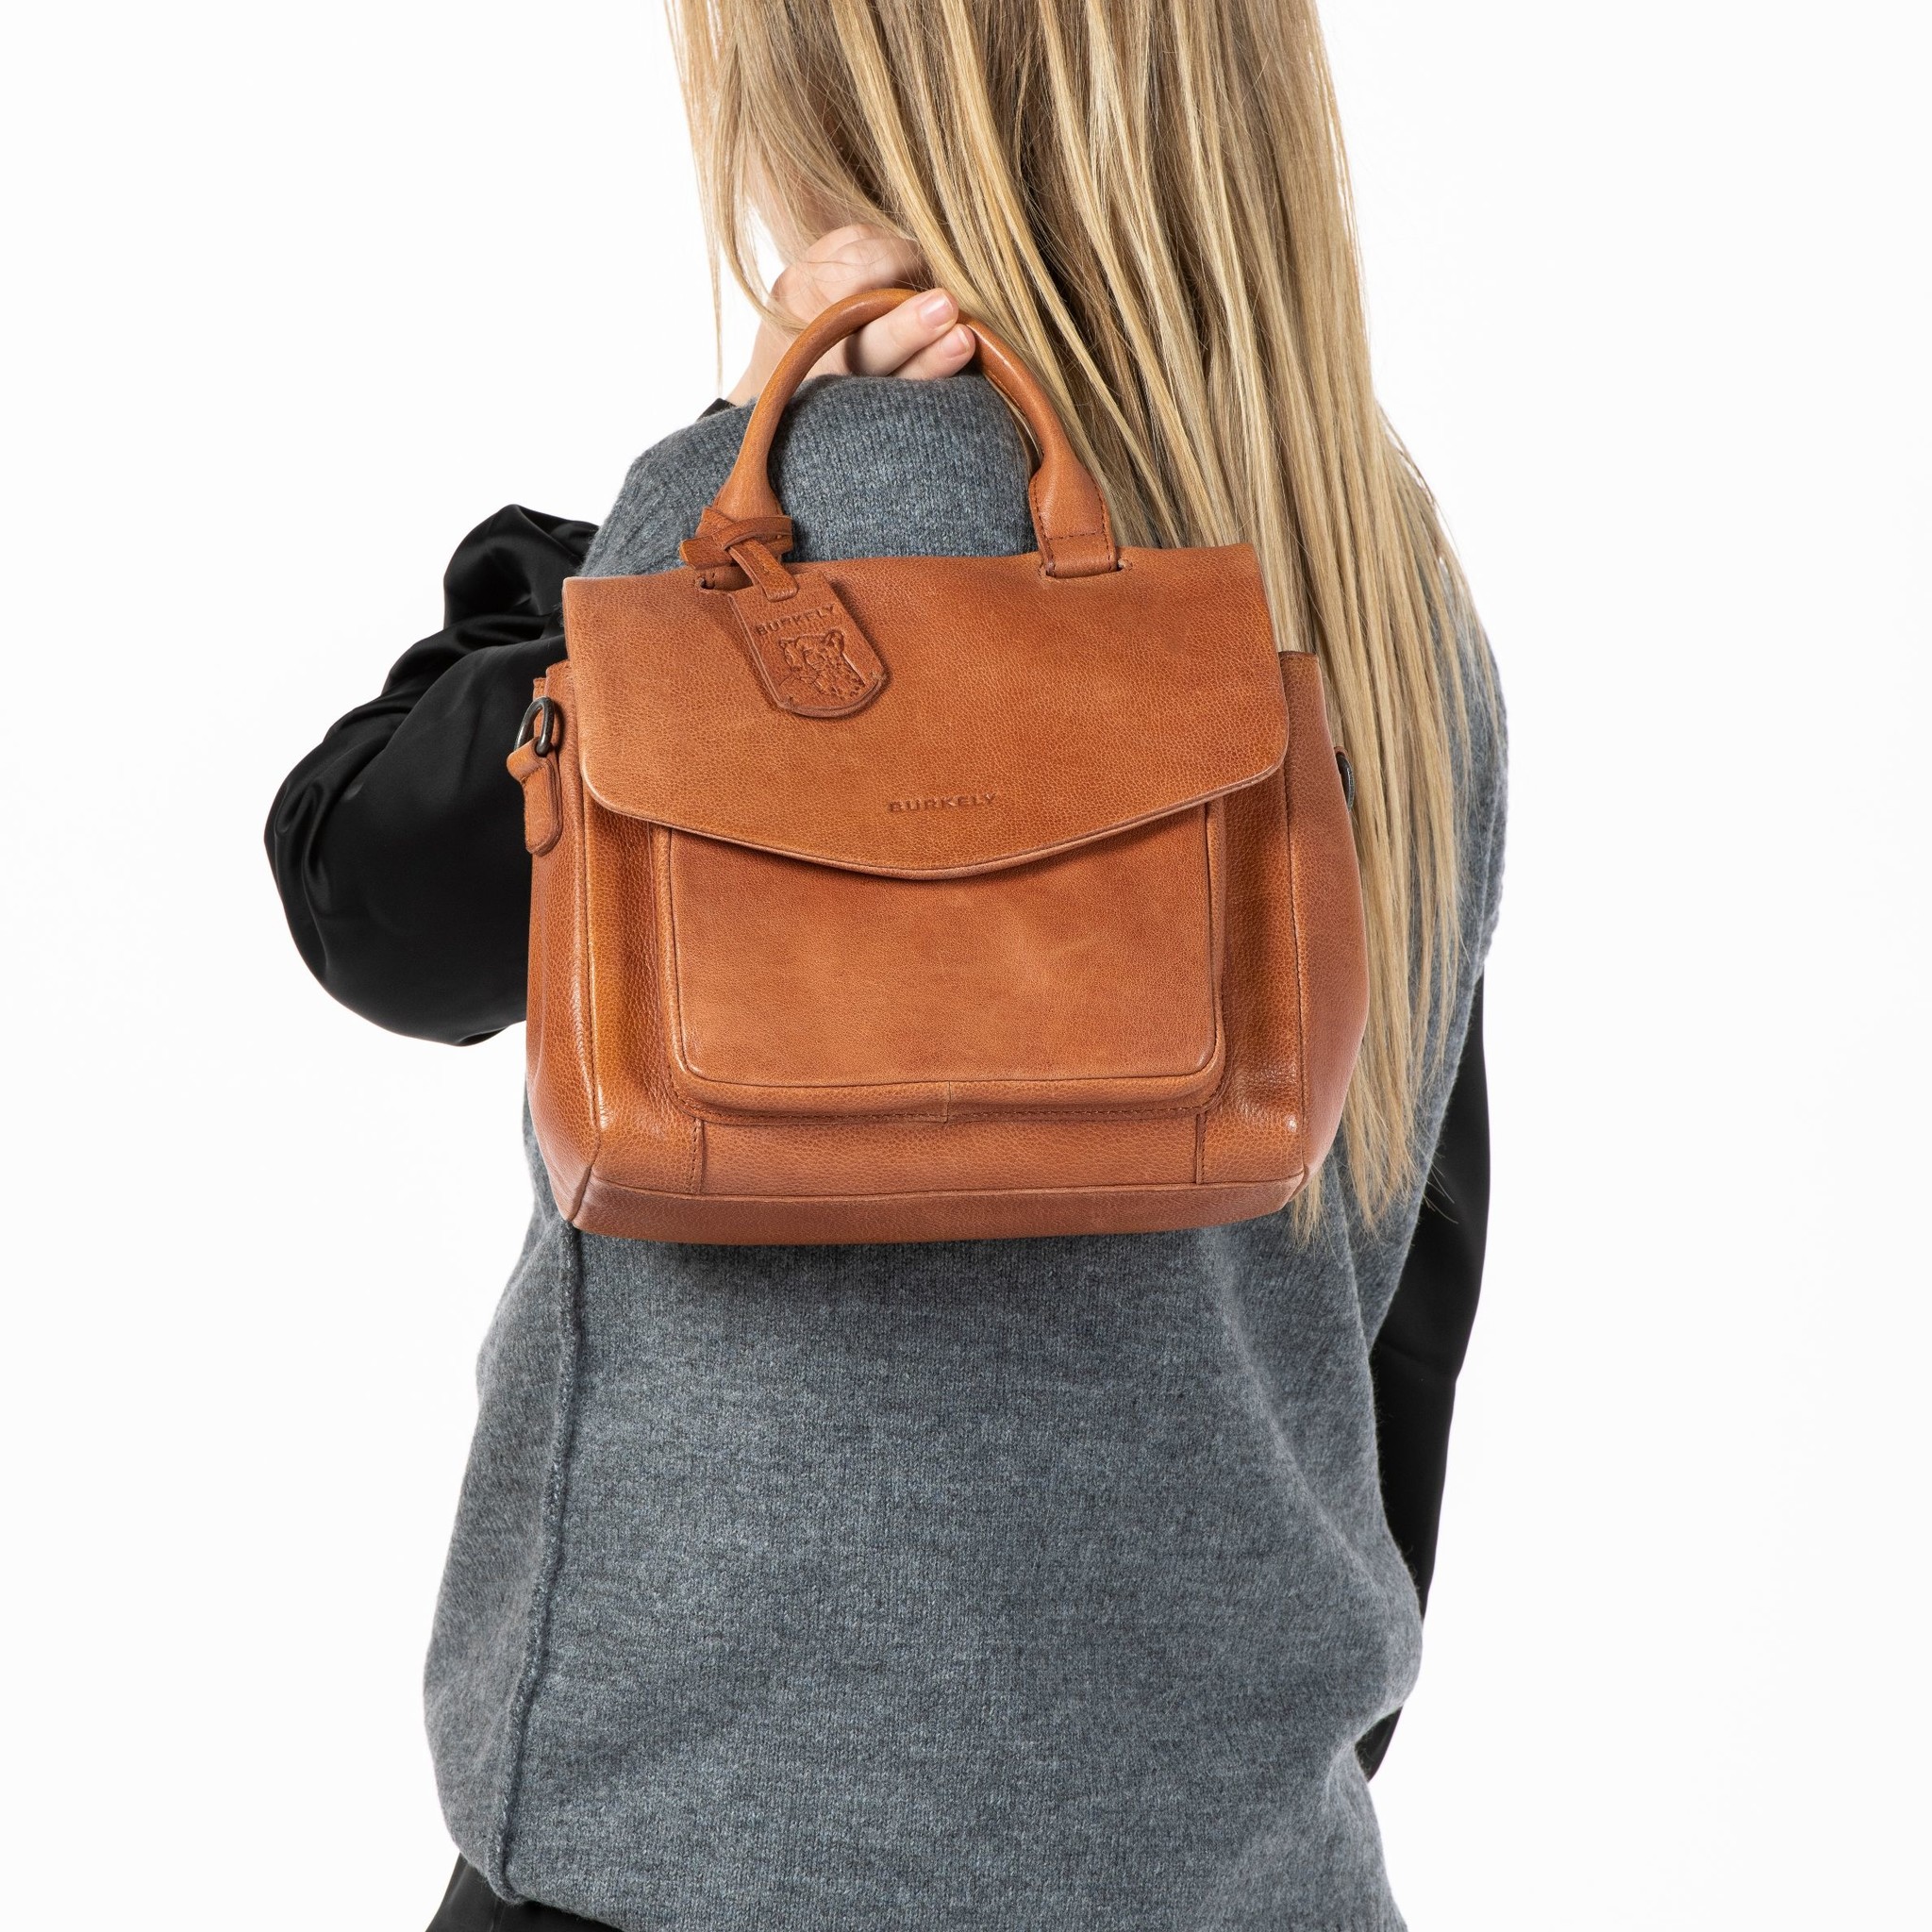 Burkely JUST JACKIE | CITYBAG 1000165.84